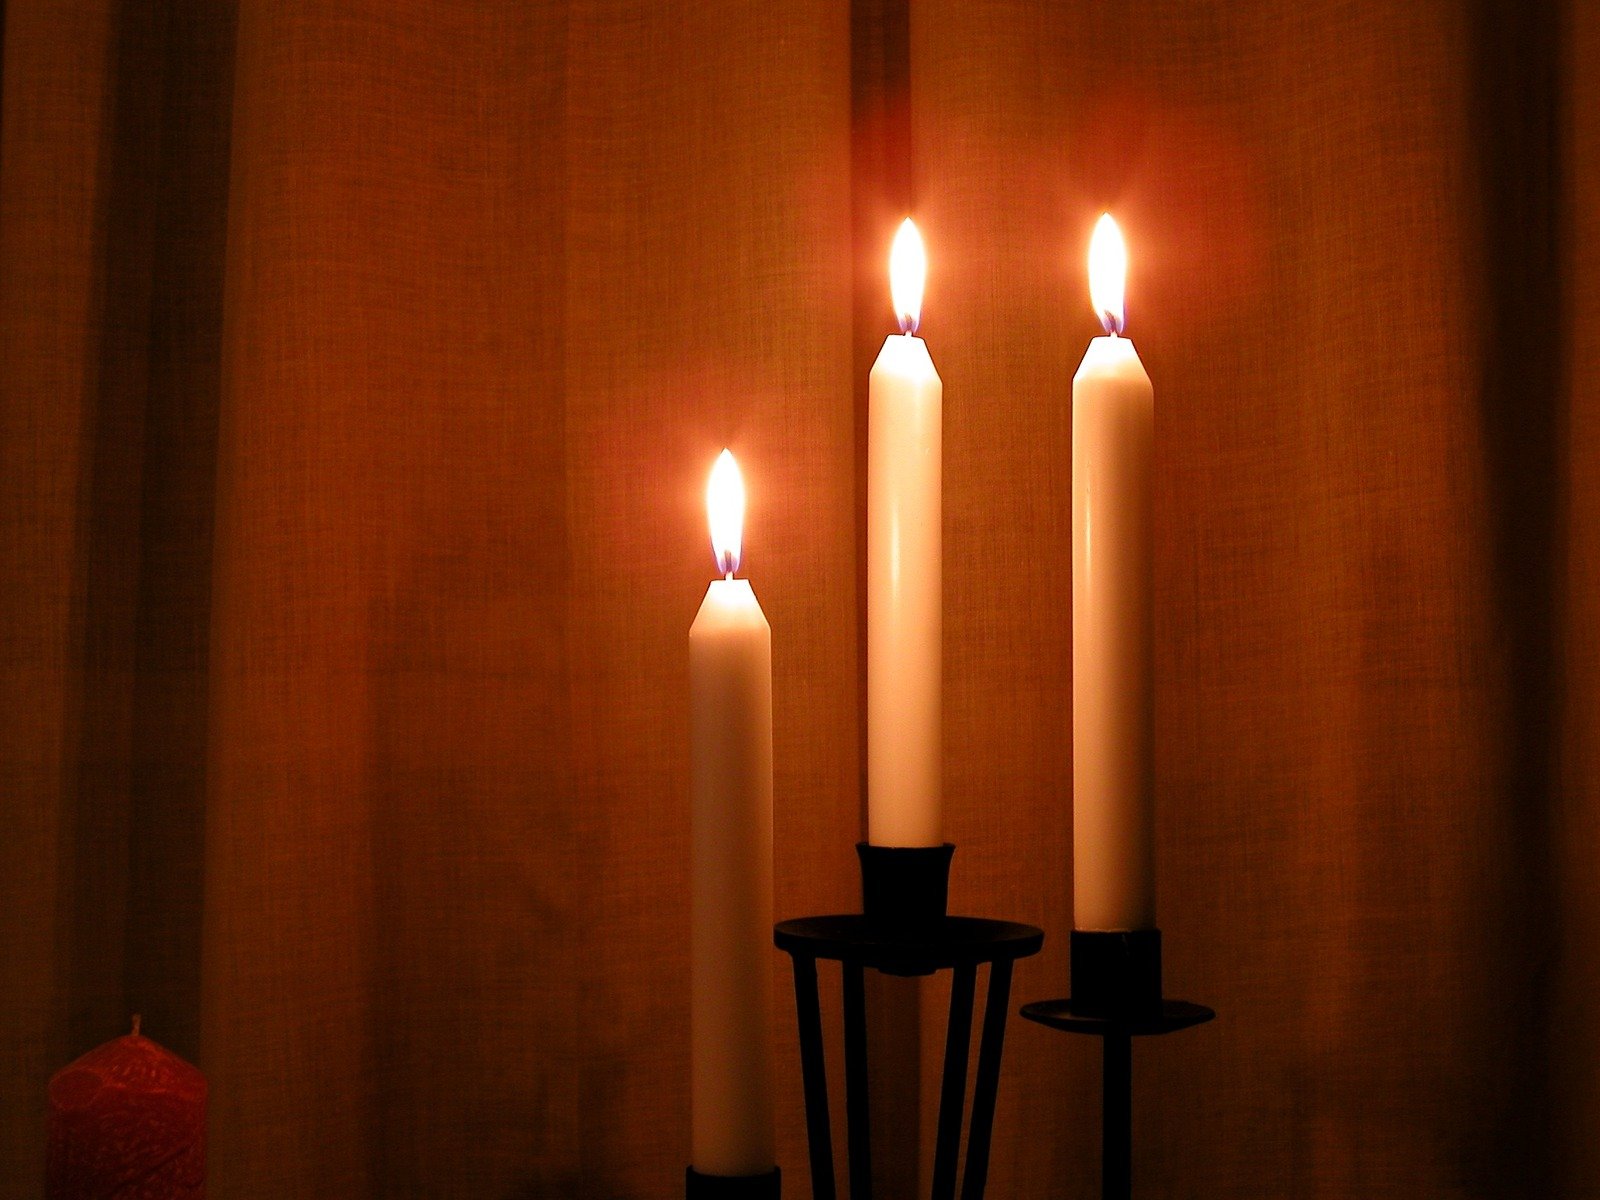 three lit candles sit in front of a curtain